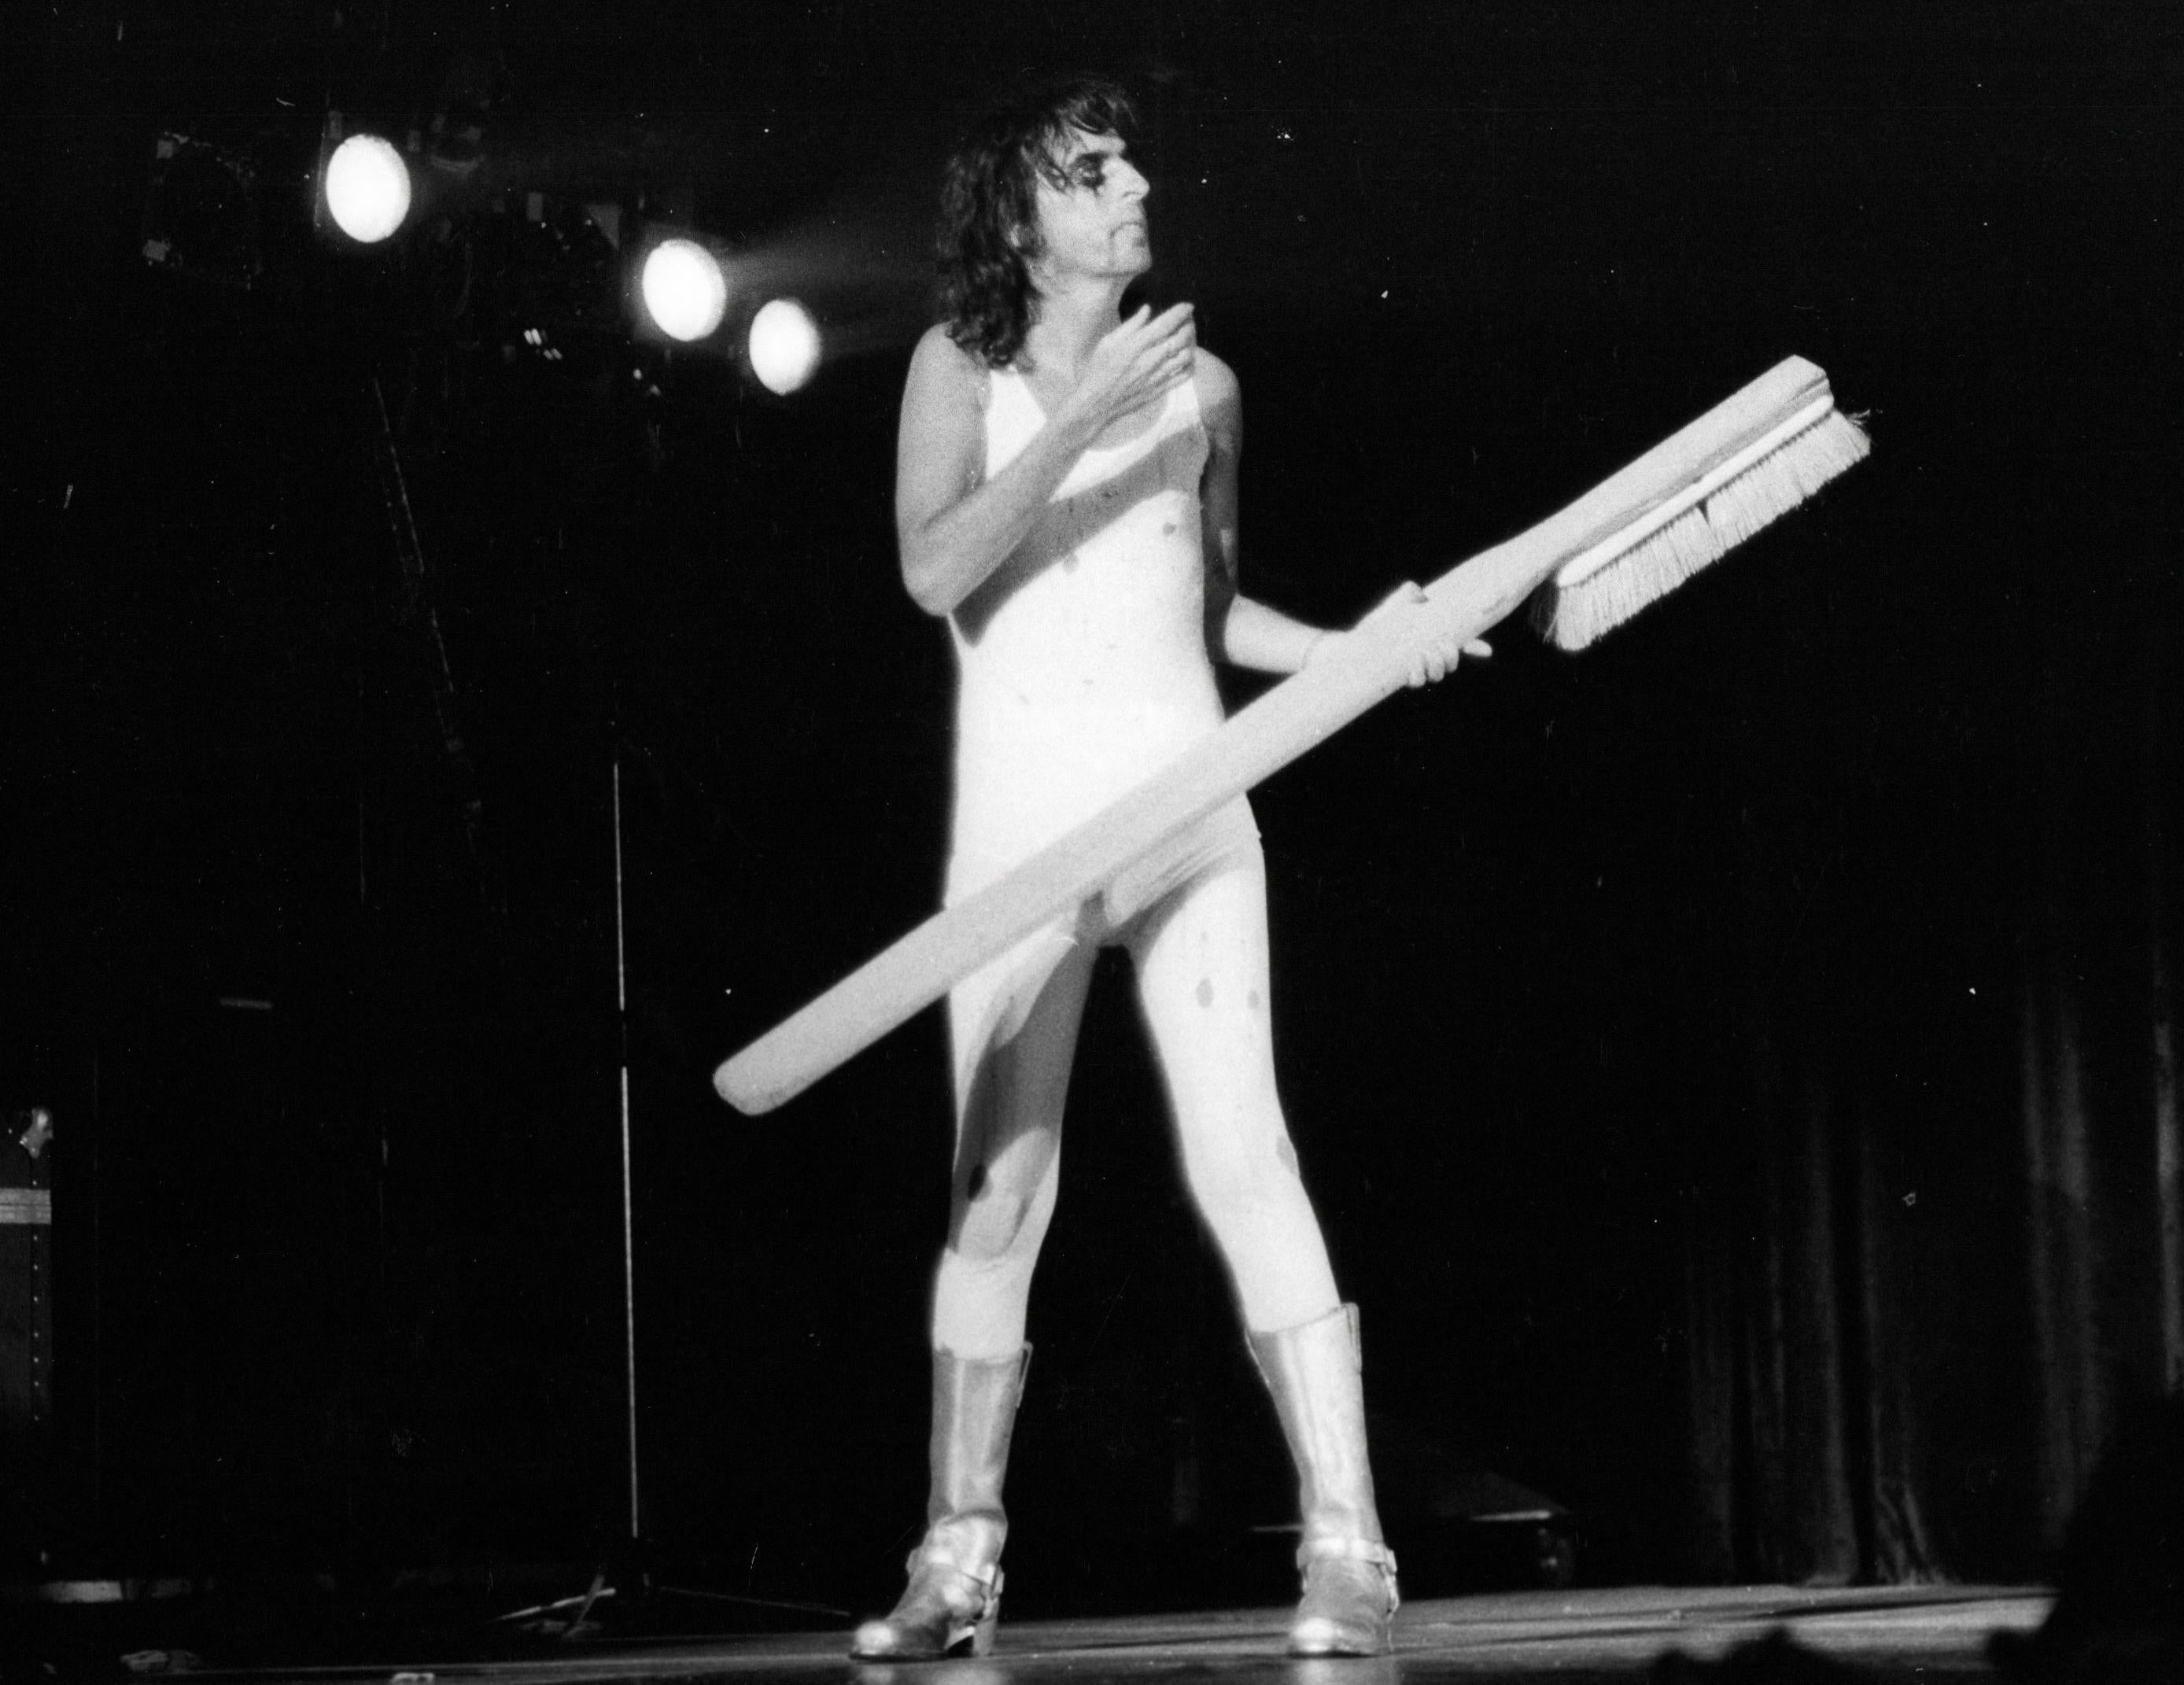 Chris Walter Portrait Photograph - Alice Cooper Performing with Giant Toothbrush Vintage Original Photograph